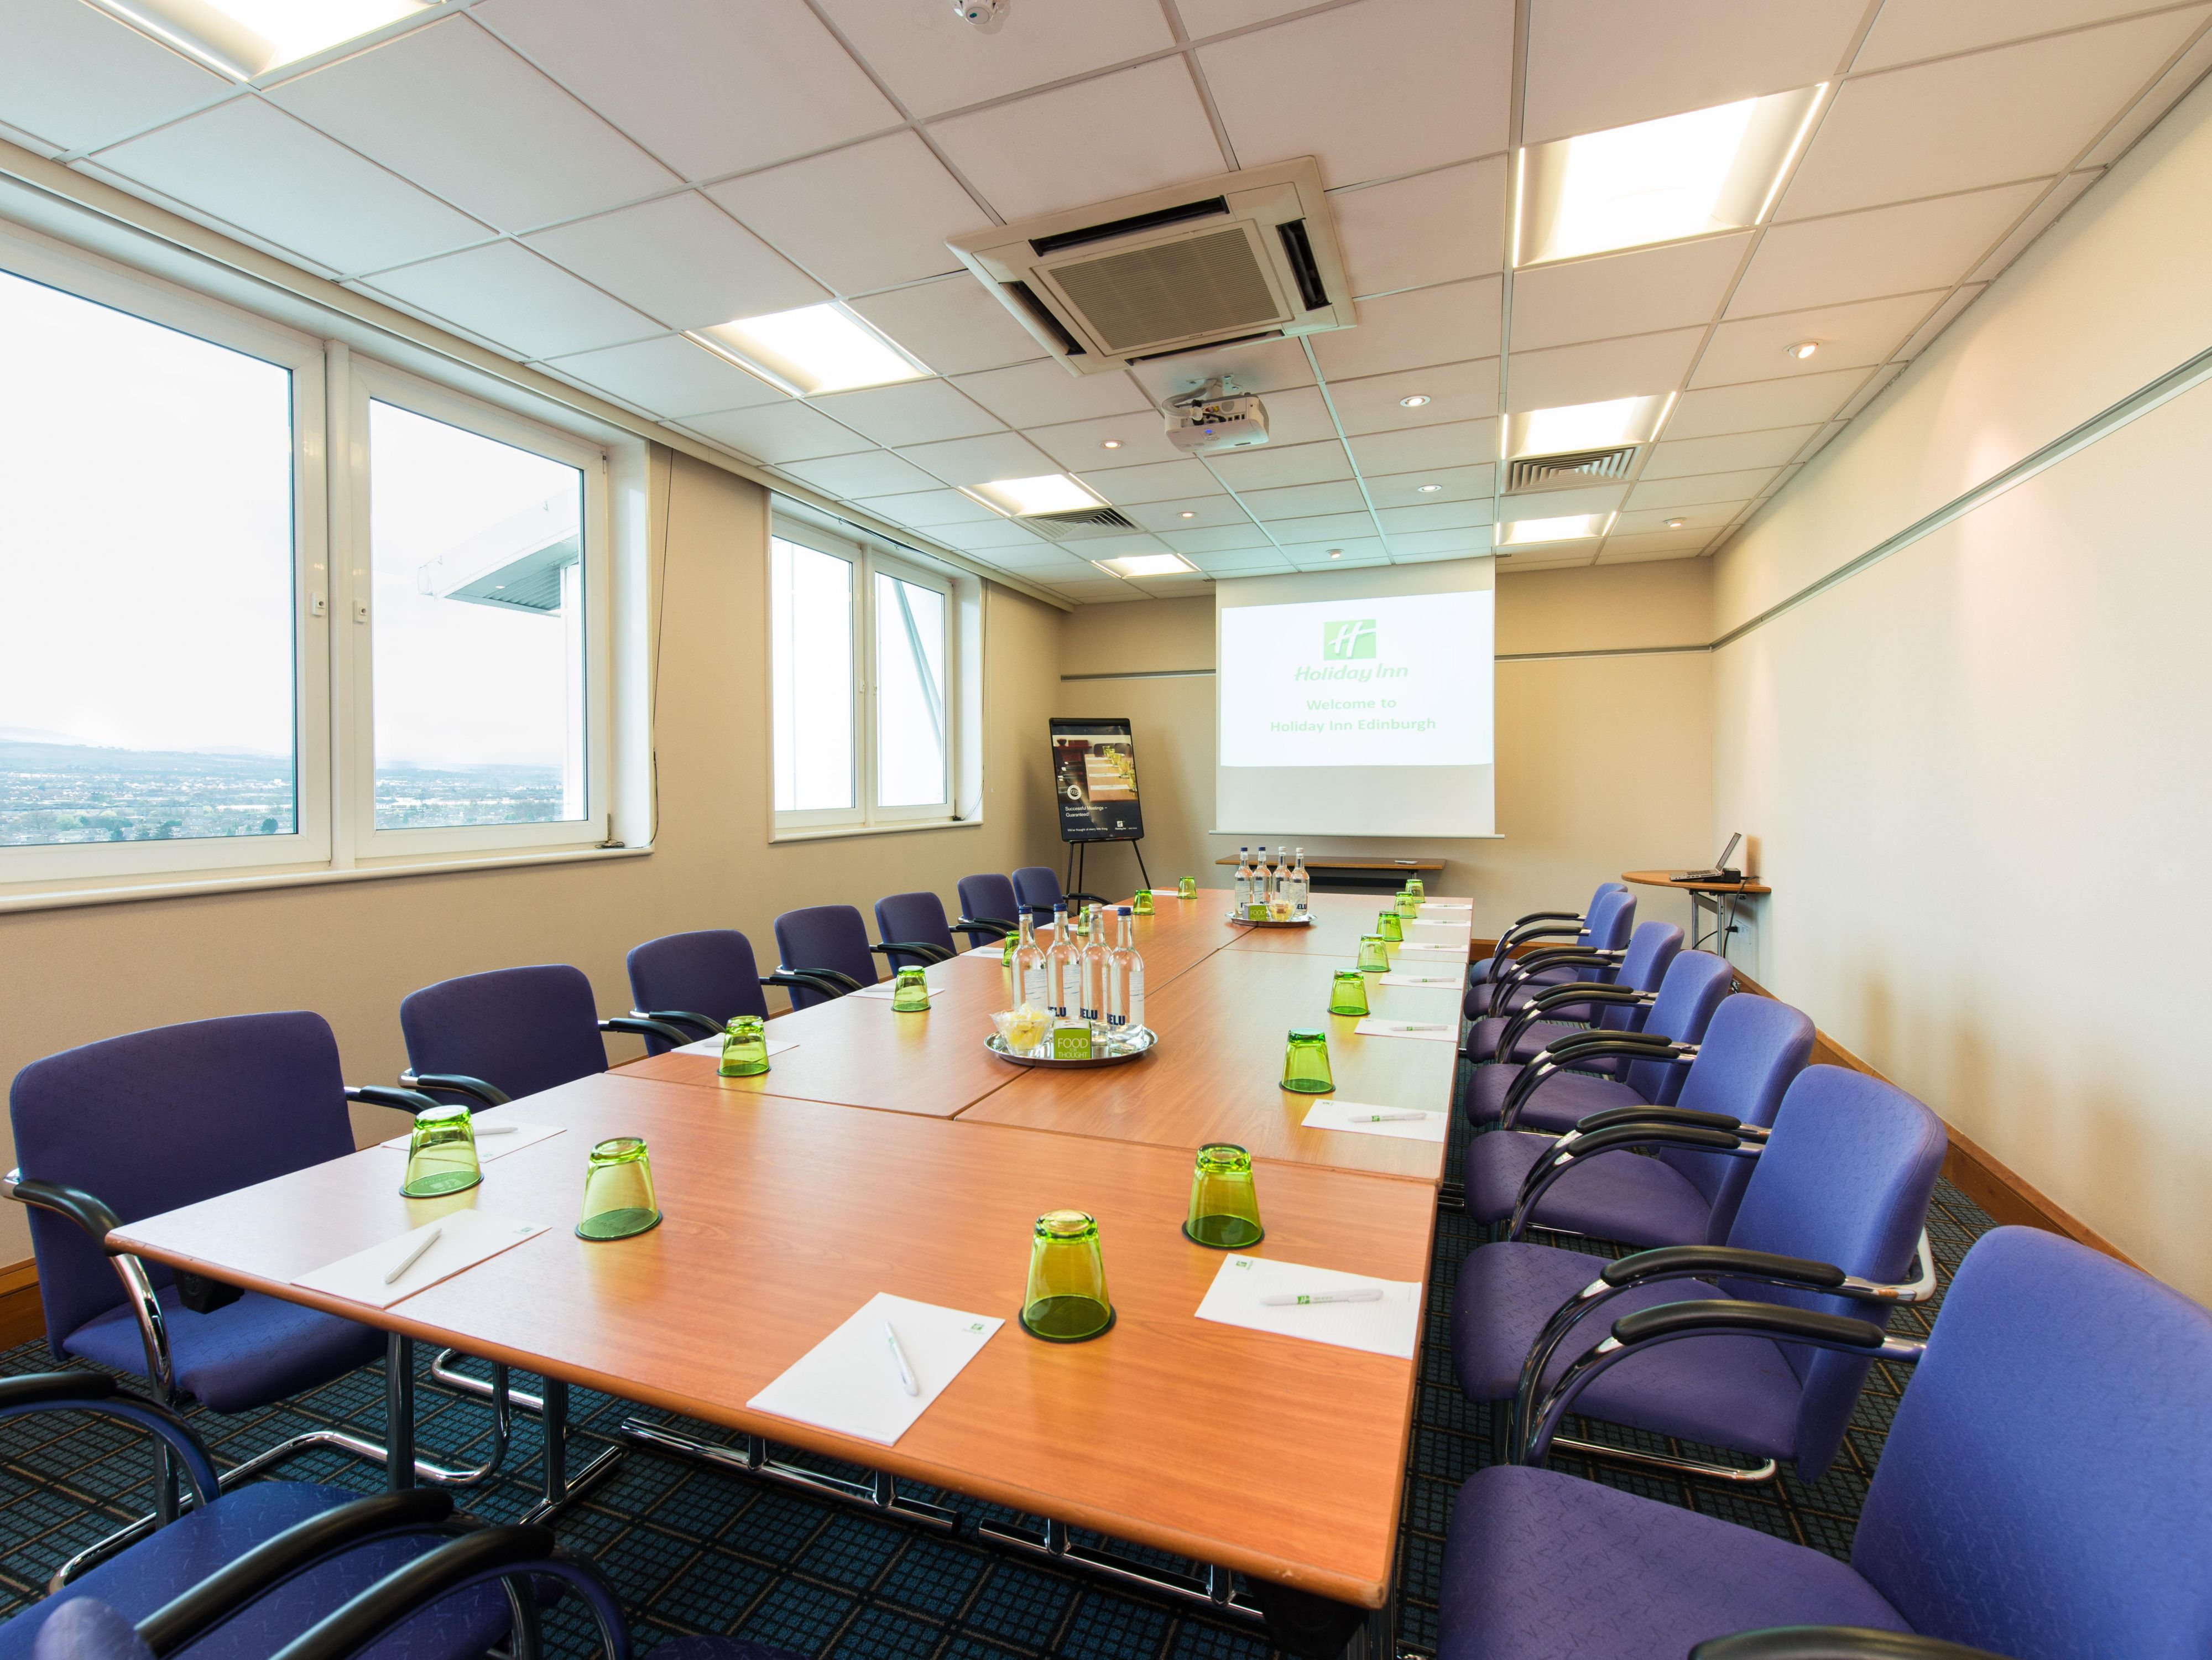 Host meetings of events for up to 120 guests in one of our 14 fully equipped, versatile meeting rooms each with panoramic views.  